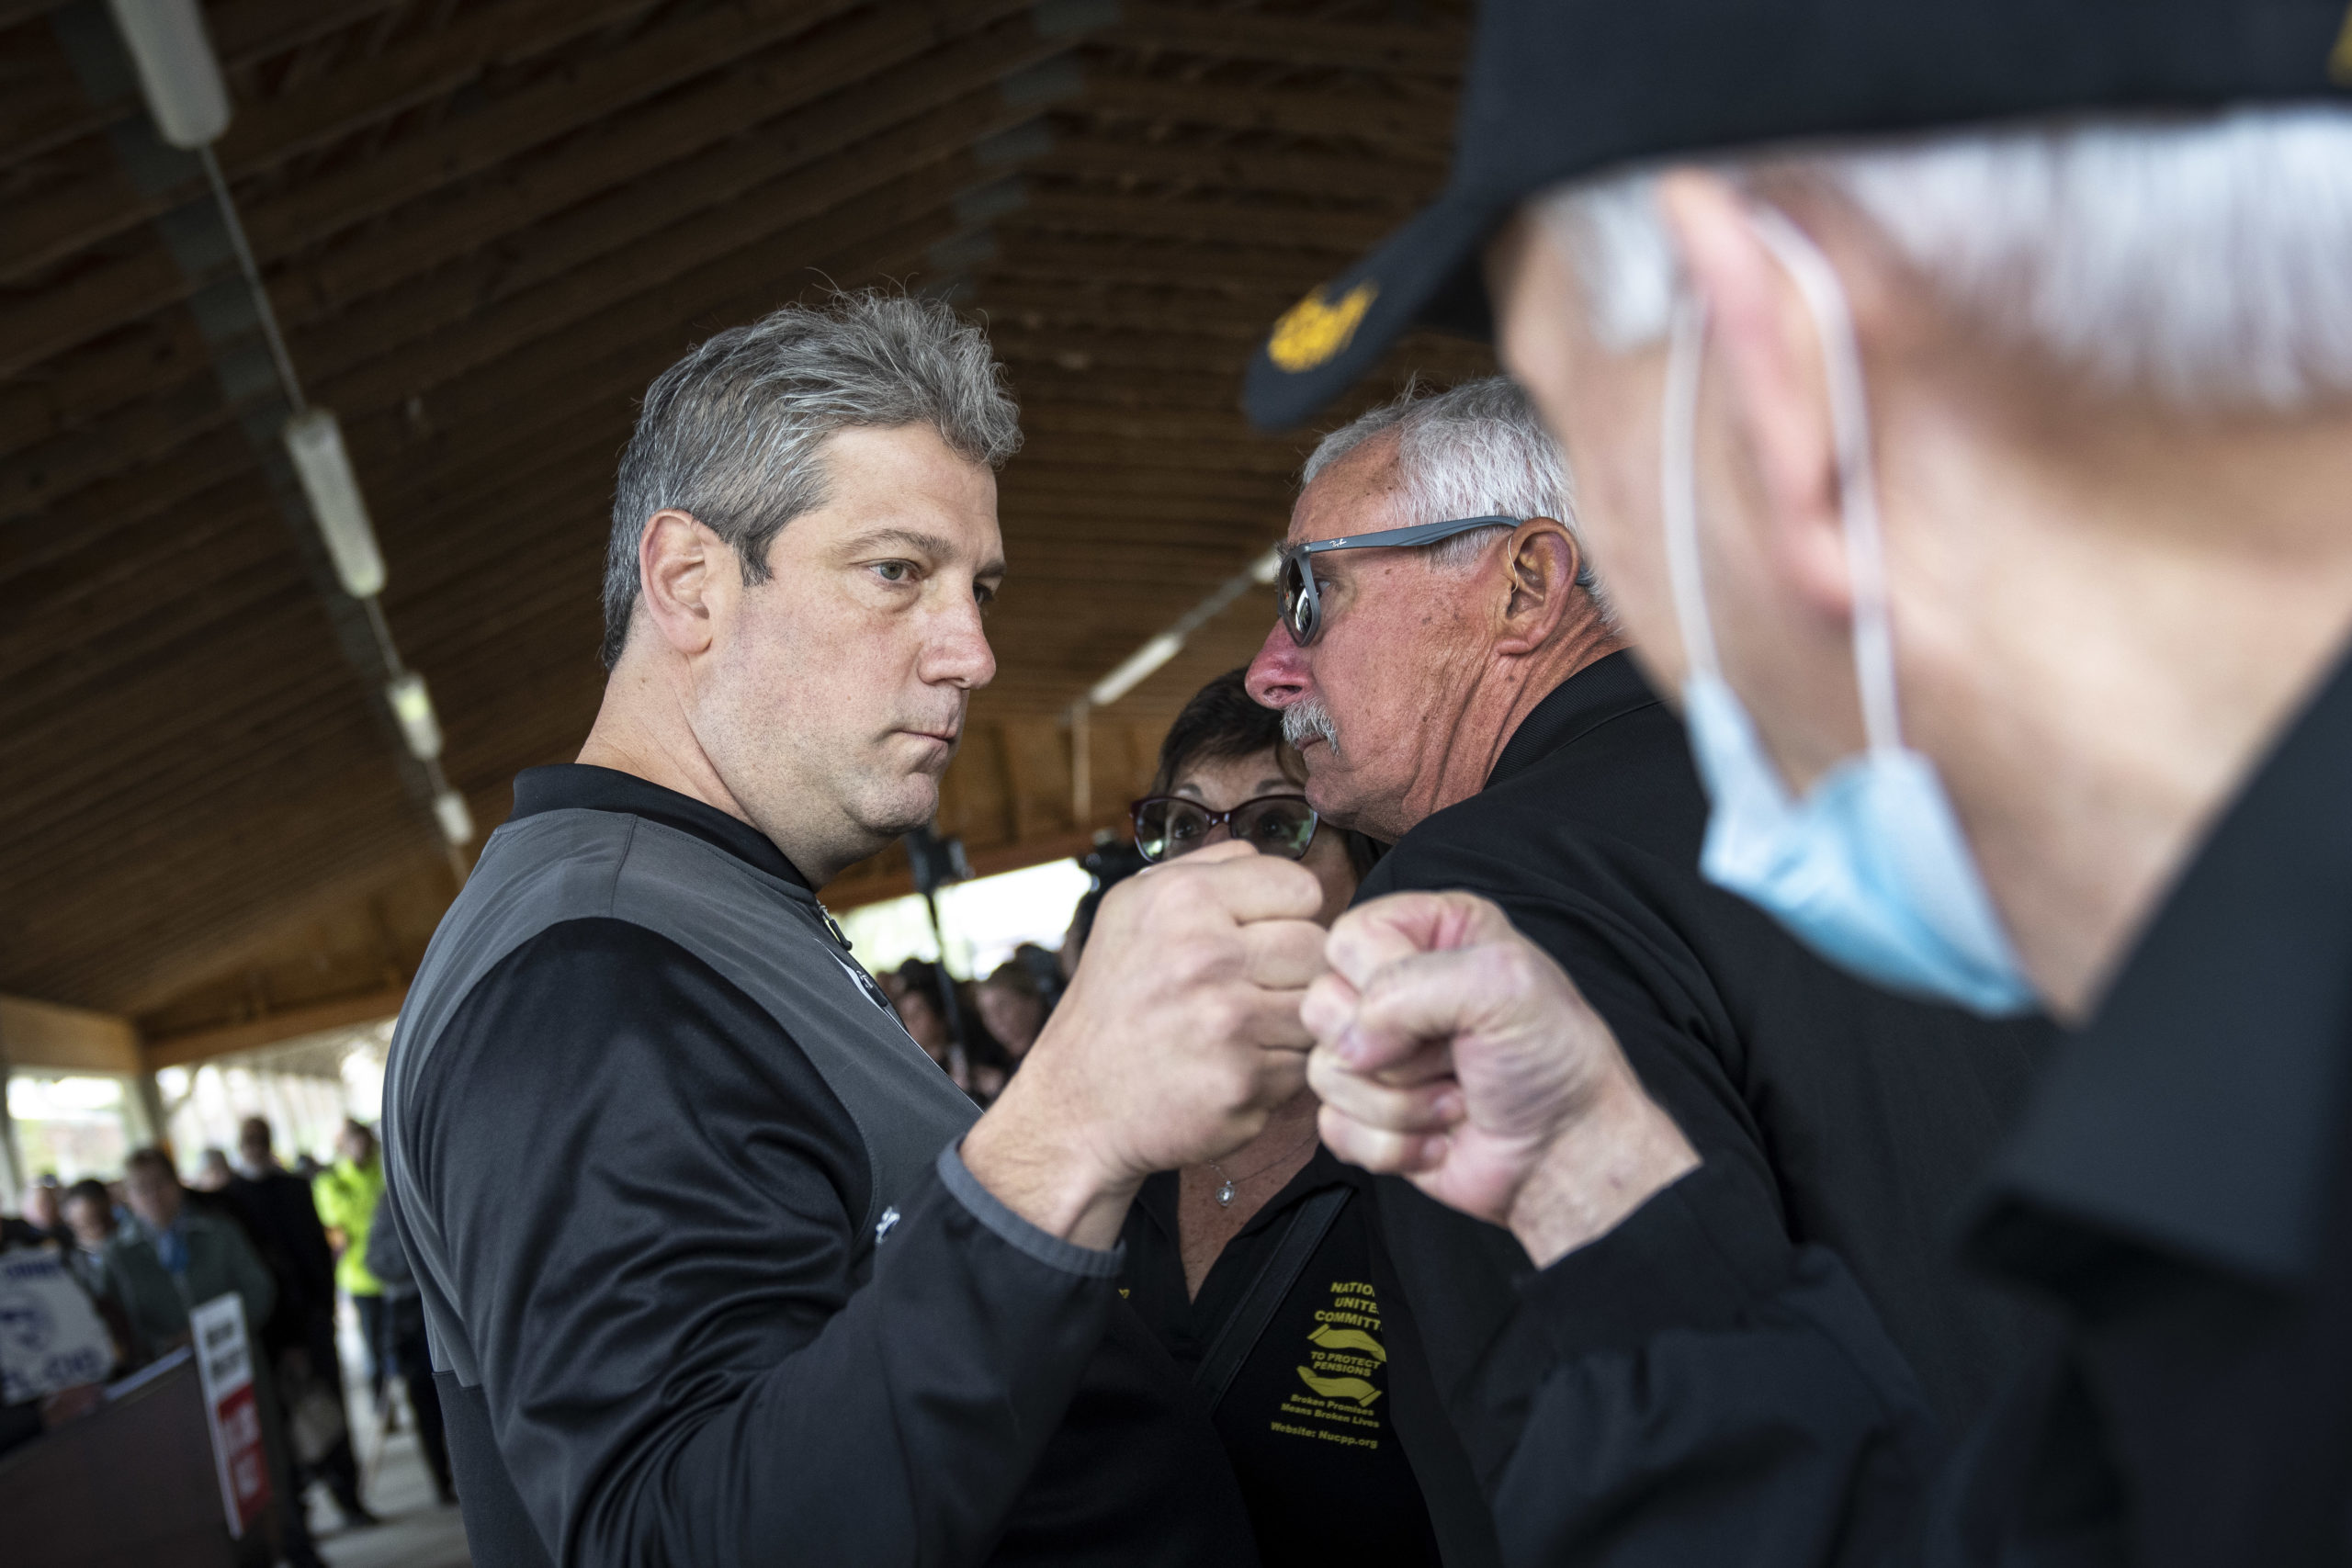 LORAIN , OH - MAY 2: U.S. Rep. Tim Ryan (D-OH), Democratic candidate for U.S. Senate in Ohio, greets supporters during a rally in support of the Bartlett Maritime project, a proposal to build a submarine service facility for the U.S. Navy, on May 2, 2022 in Lorain, Ohio. The rally was organized by the Ohio AFL-CIO, Ohio State Building and Construction Trades Council and the Bartlett Marine Corporation. According to organizers, the proposal would create thousands of jobs for the region. (Photo by Drew Angerer/Getty Images)